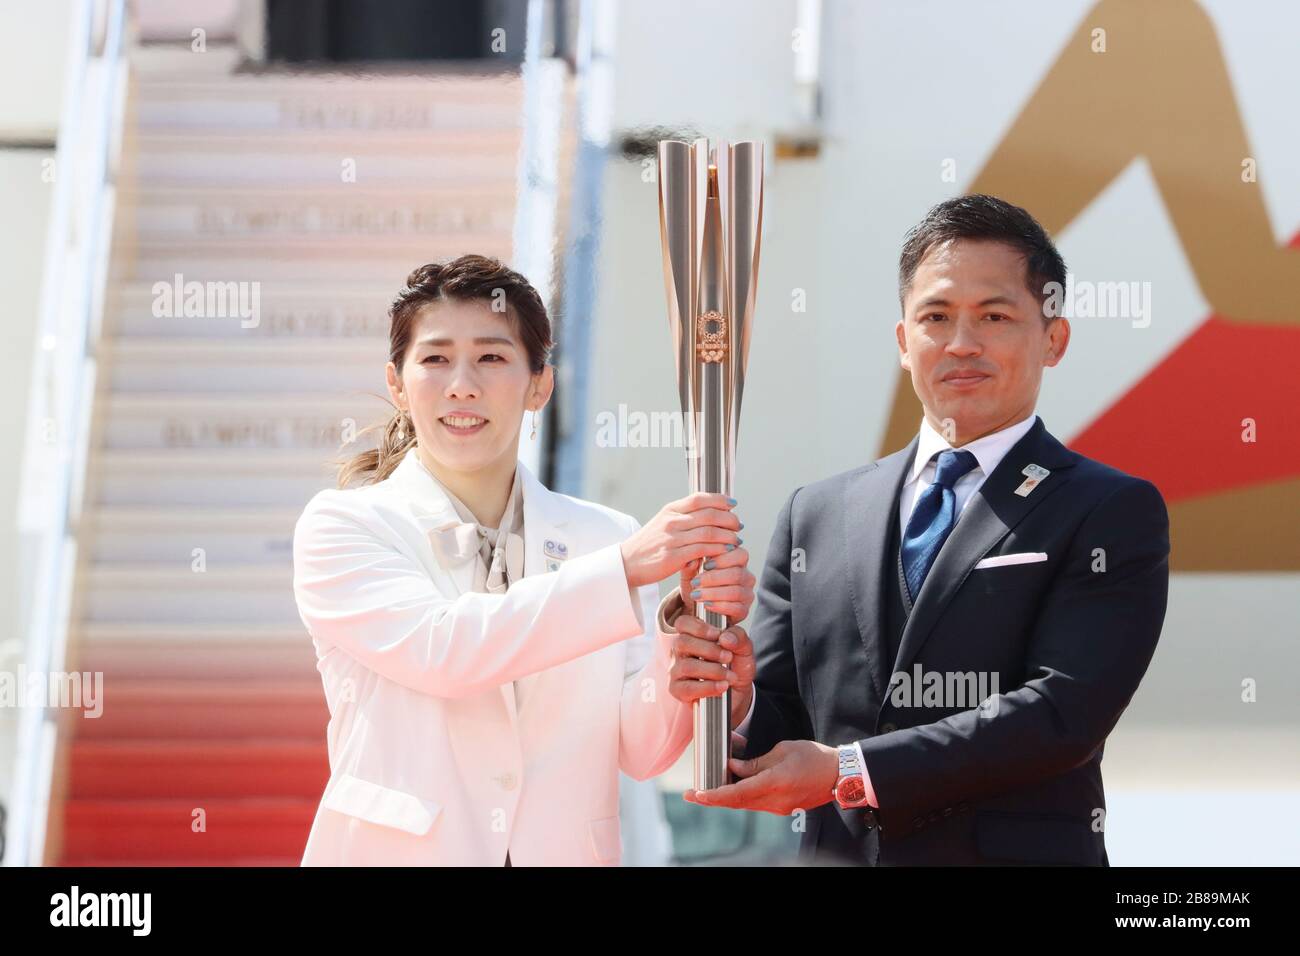 Higashi Matsushima, Japan. 20th Mar, 2020. Olympic gold medalists Saori Yoshida (L) of wrestling and Tadahiro Nomura (R) of judo hold a torch as they attend the arrival ceremony for the Olympic flame at the Matsushima air base in Higashi Matsushima in Miyagi prefecture, northern Japan on Friday, March 20, 2020. Tokyo 2020 Olympic Games will start from March 26 at Fukushima prefecture. Credit: Yoshio Tsunoda/AFLO/Alamy Live News Stock Photo